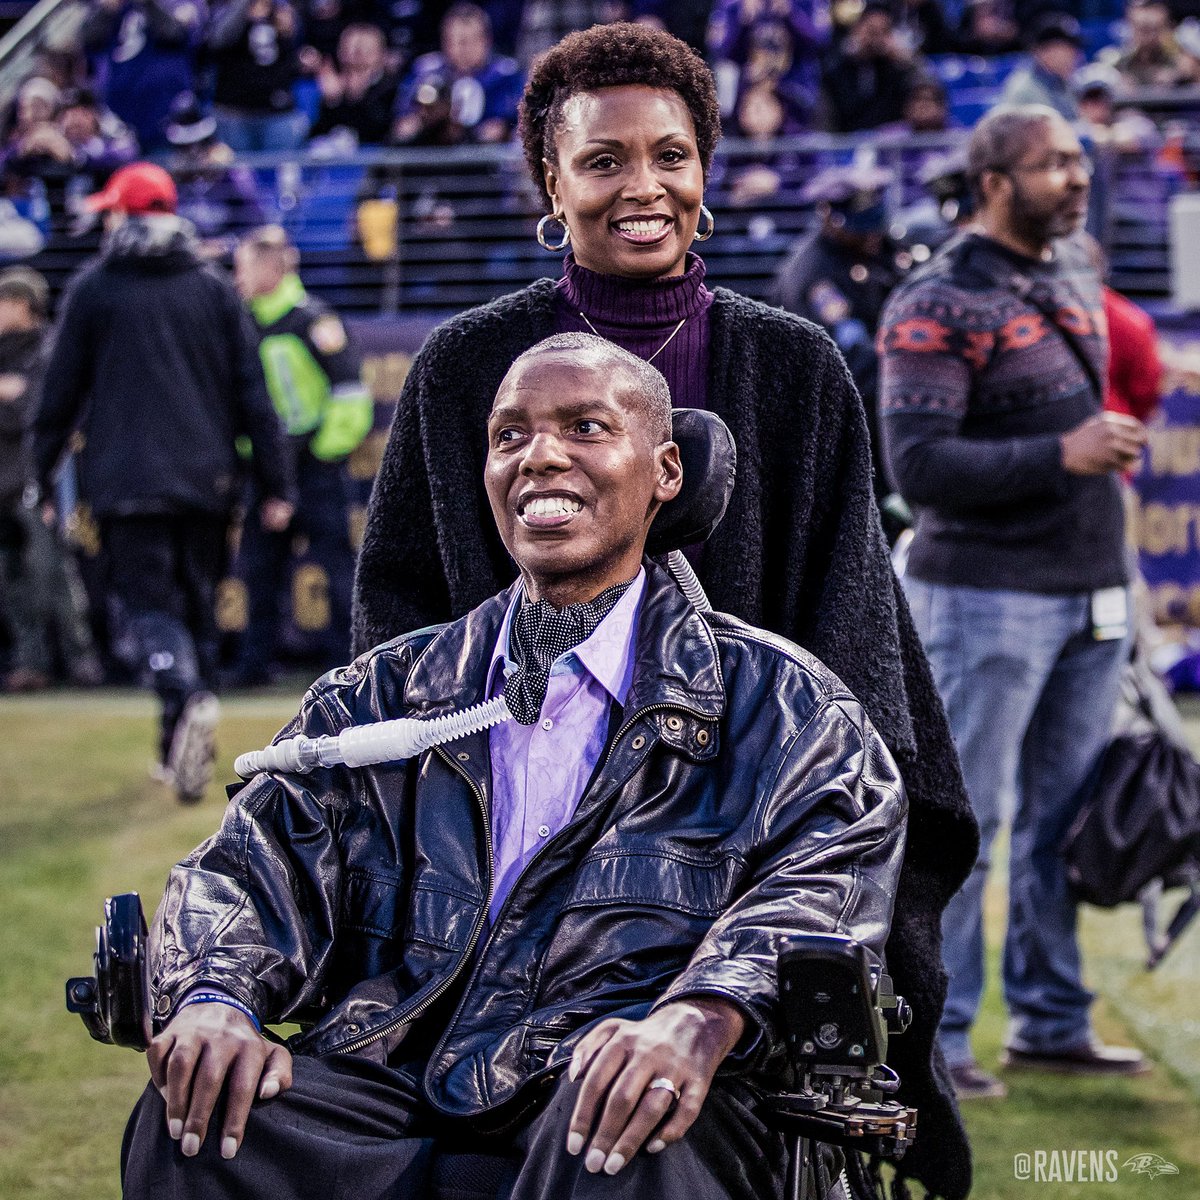 Join us in wishing a very happy birthday to @OJBrigance ❗️❗️